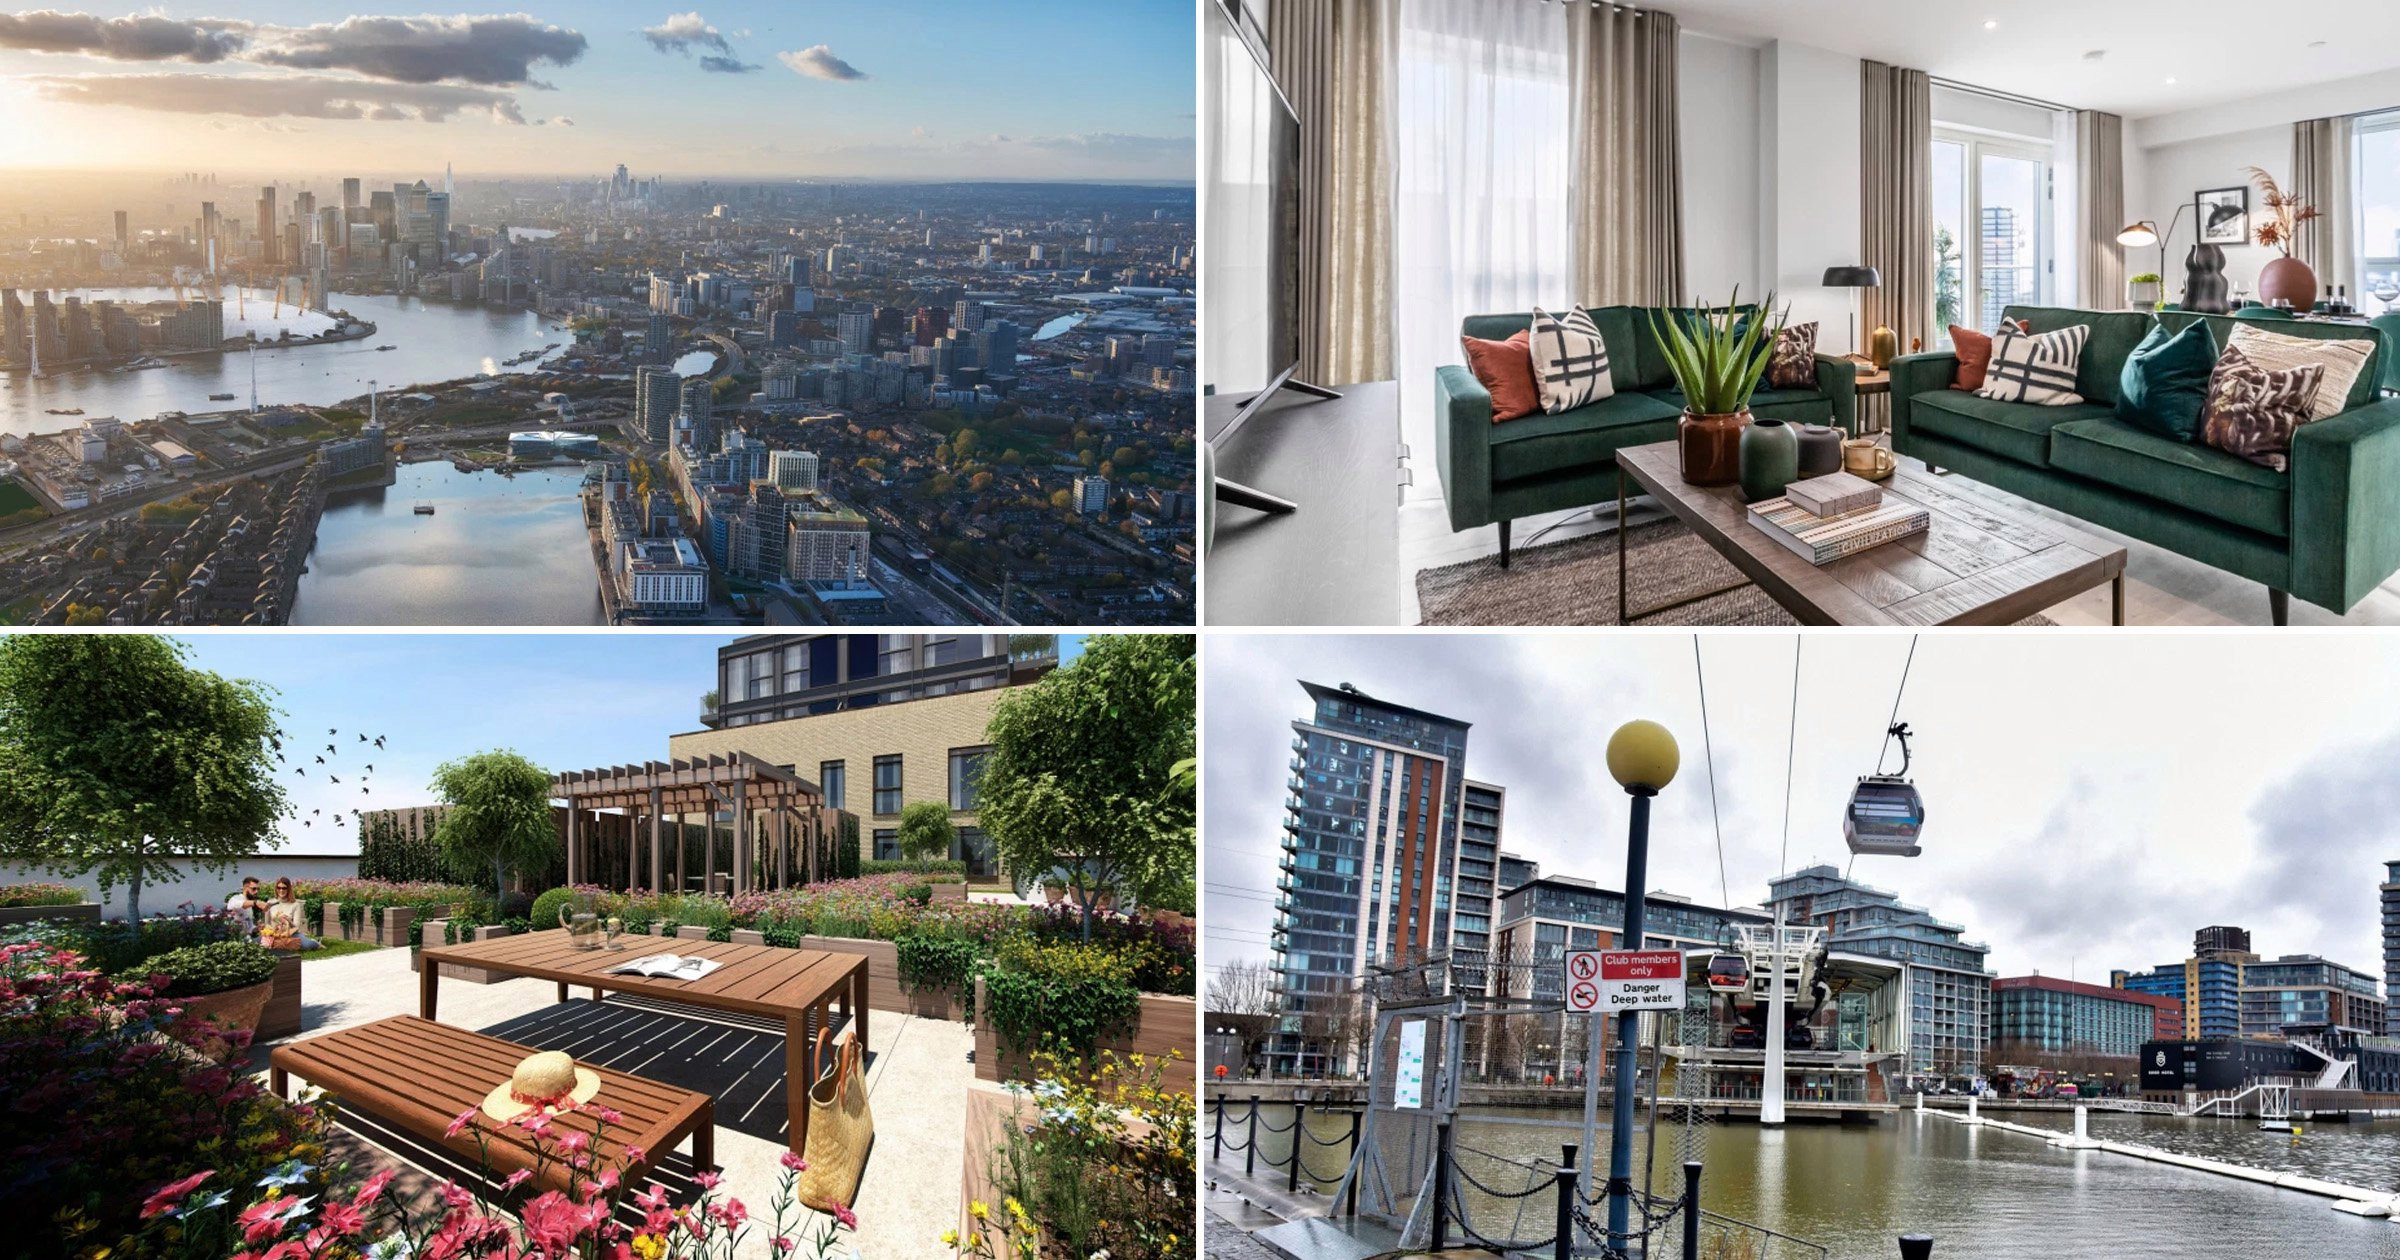 Newly regenerated Royal Docks area one of London’s best spots for buyers